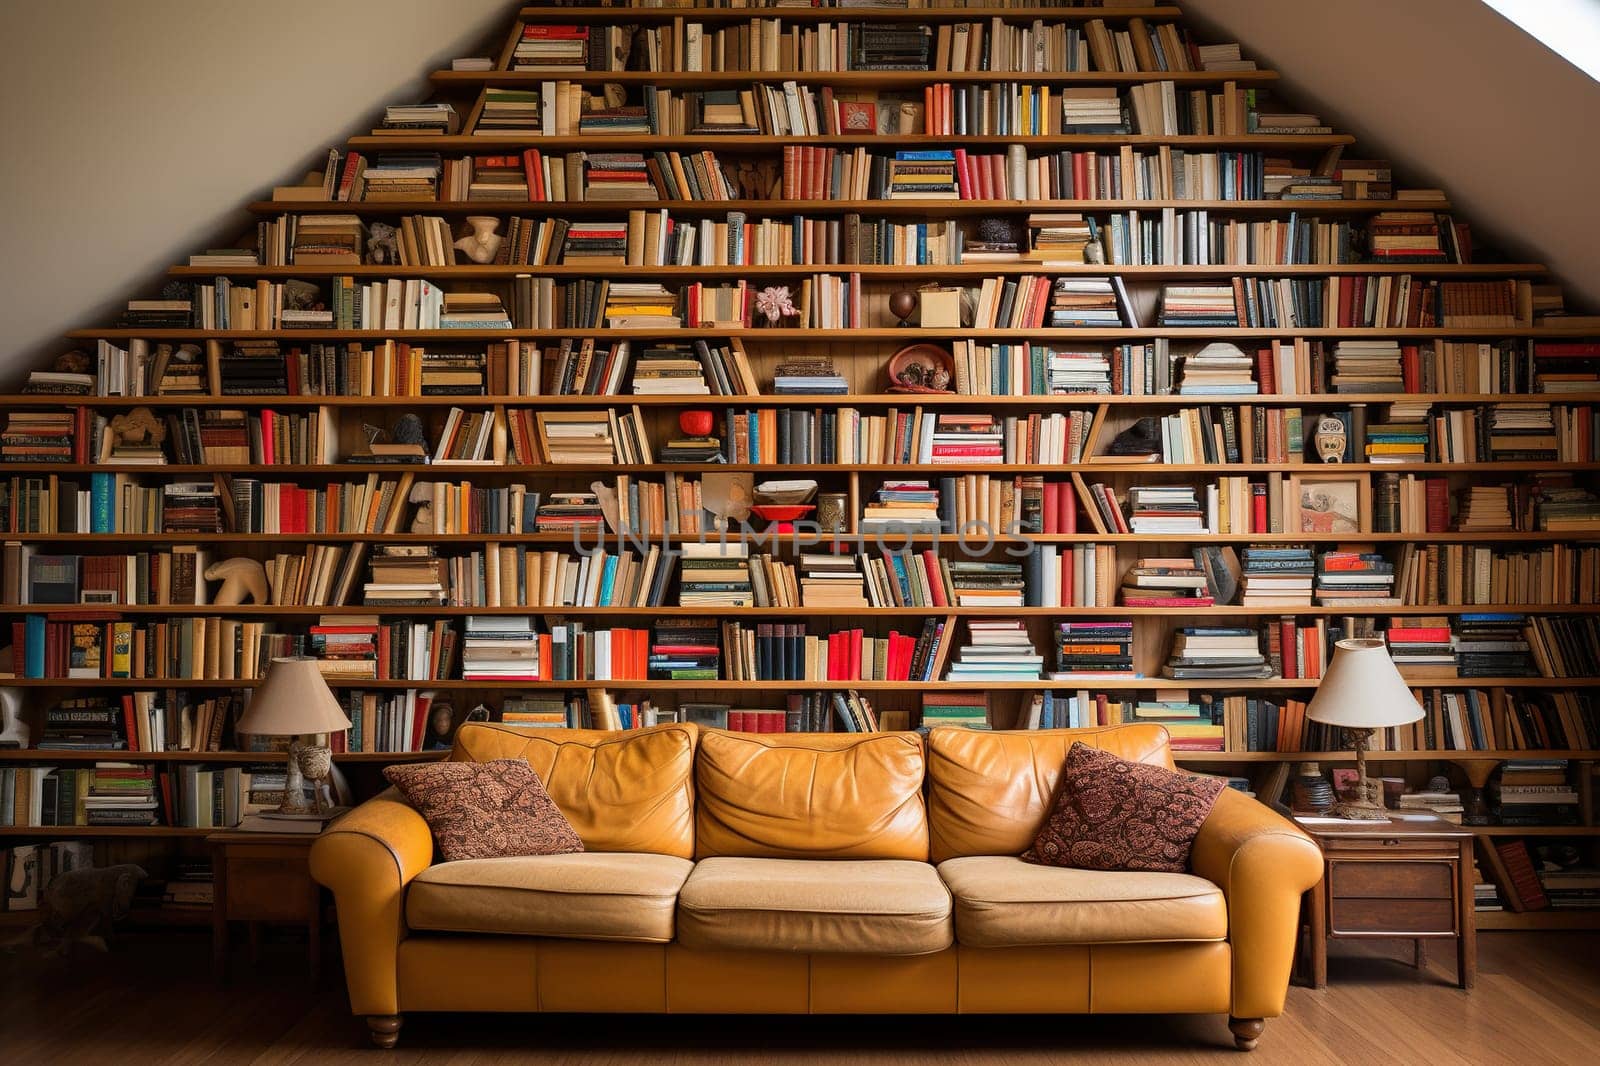 A wall with overflowing bookshelves up to the ceiling, a sofa next to the bookshelves. Generated by artificial intelligence by Vovmar